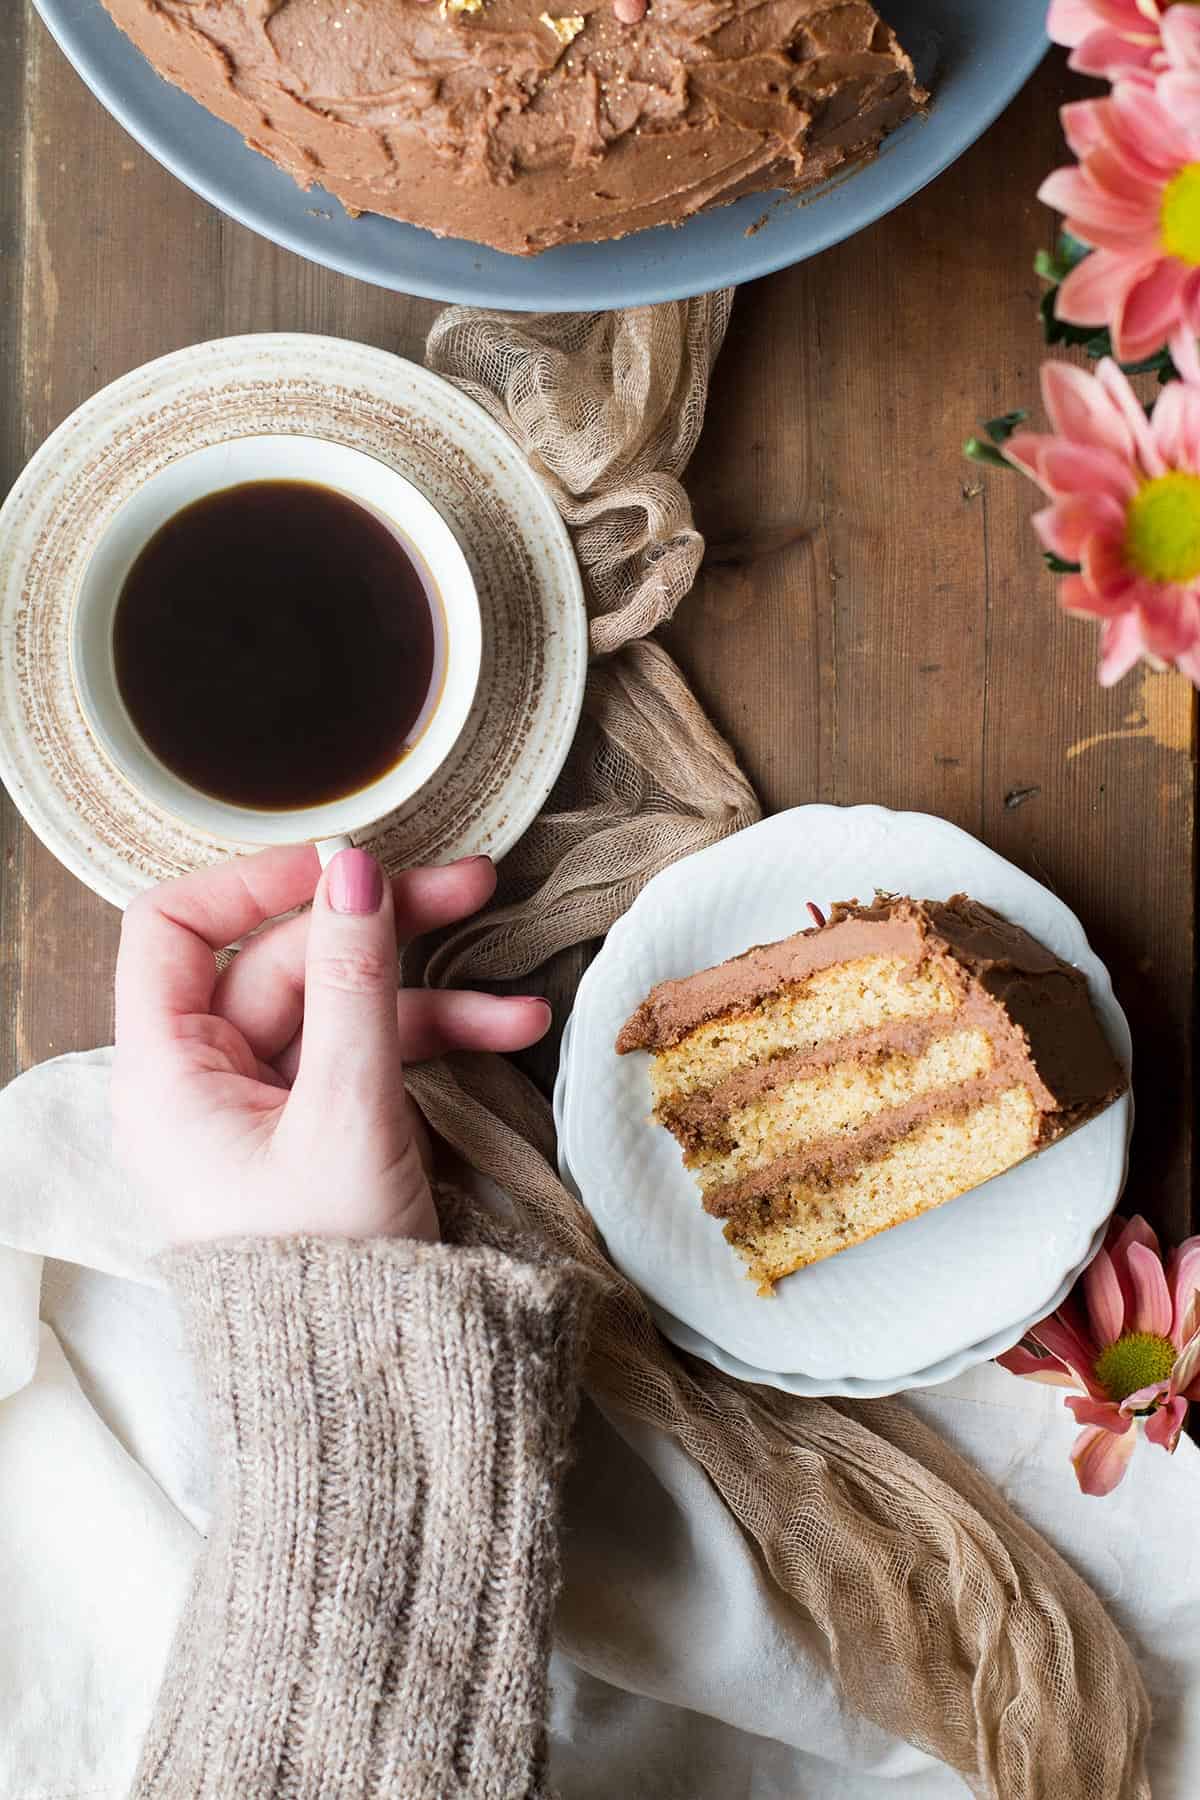 Hand holding a cup of coffee, a slice of spice cake next to it.